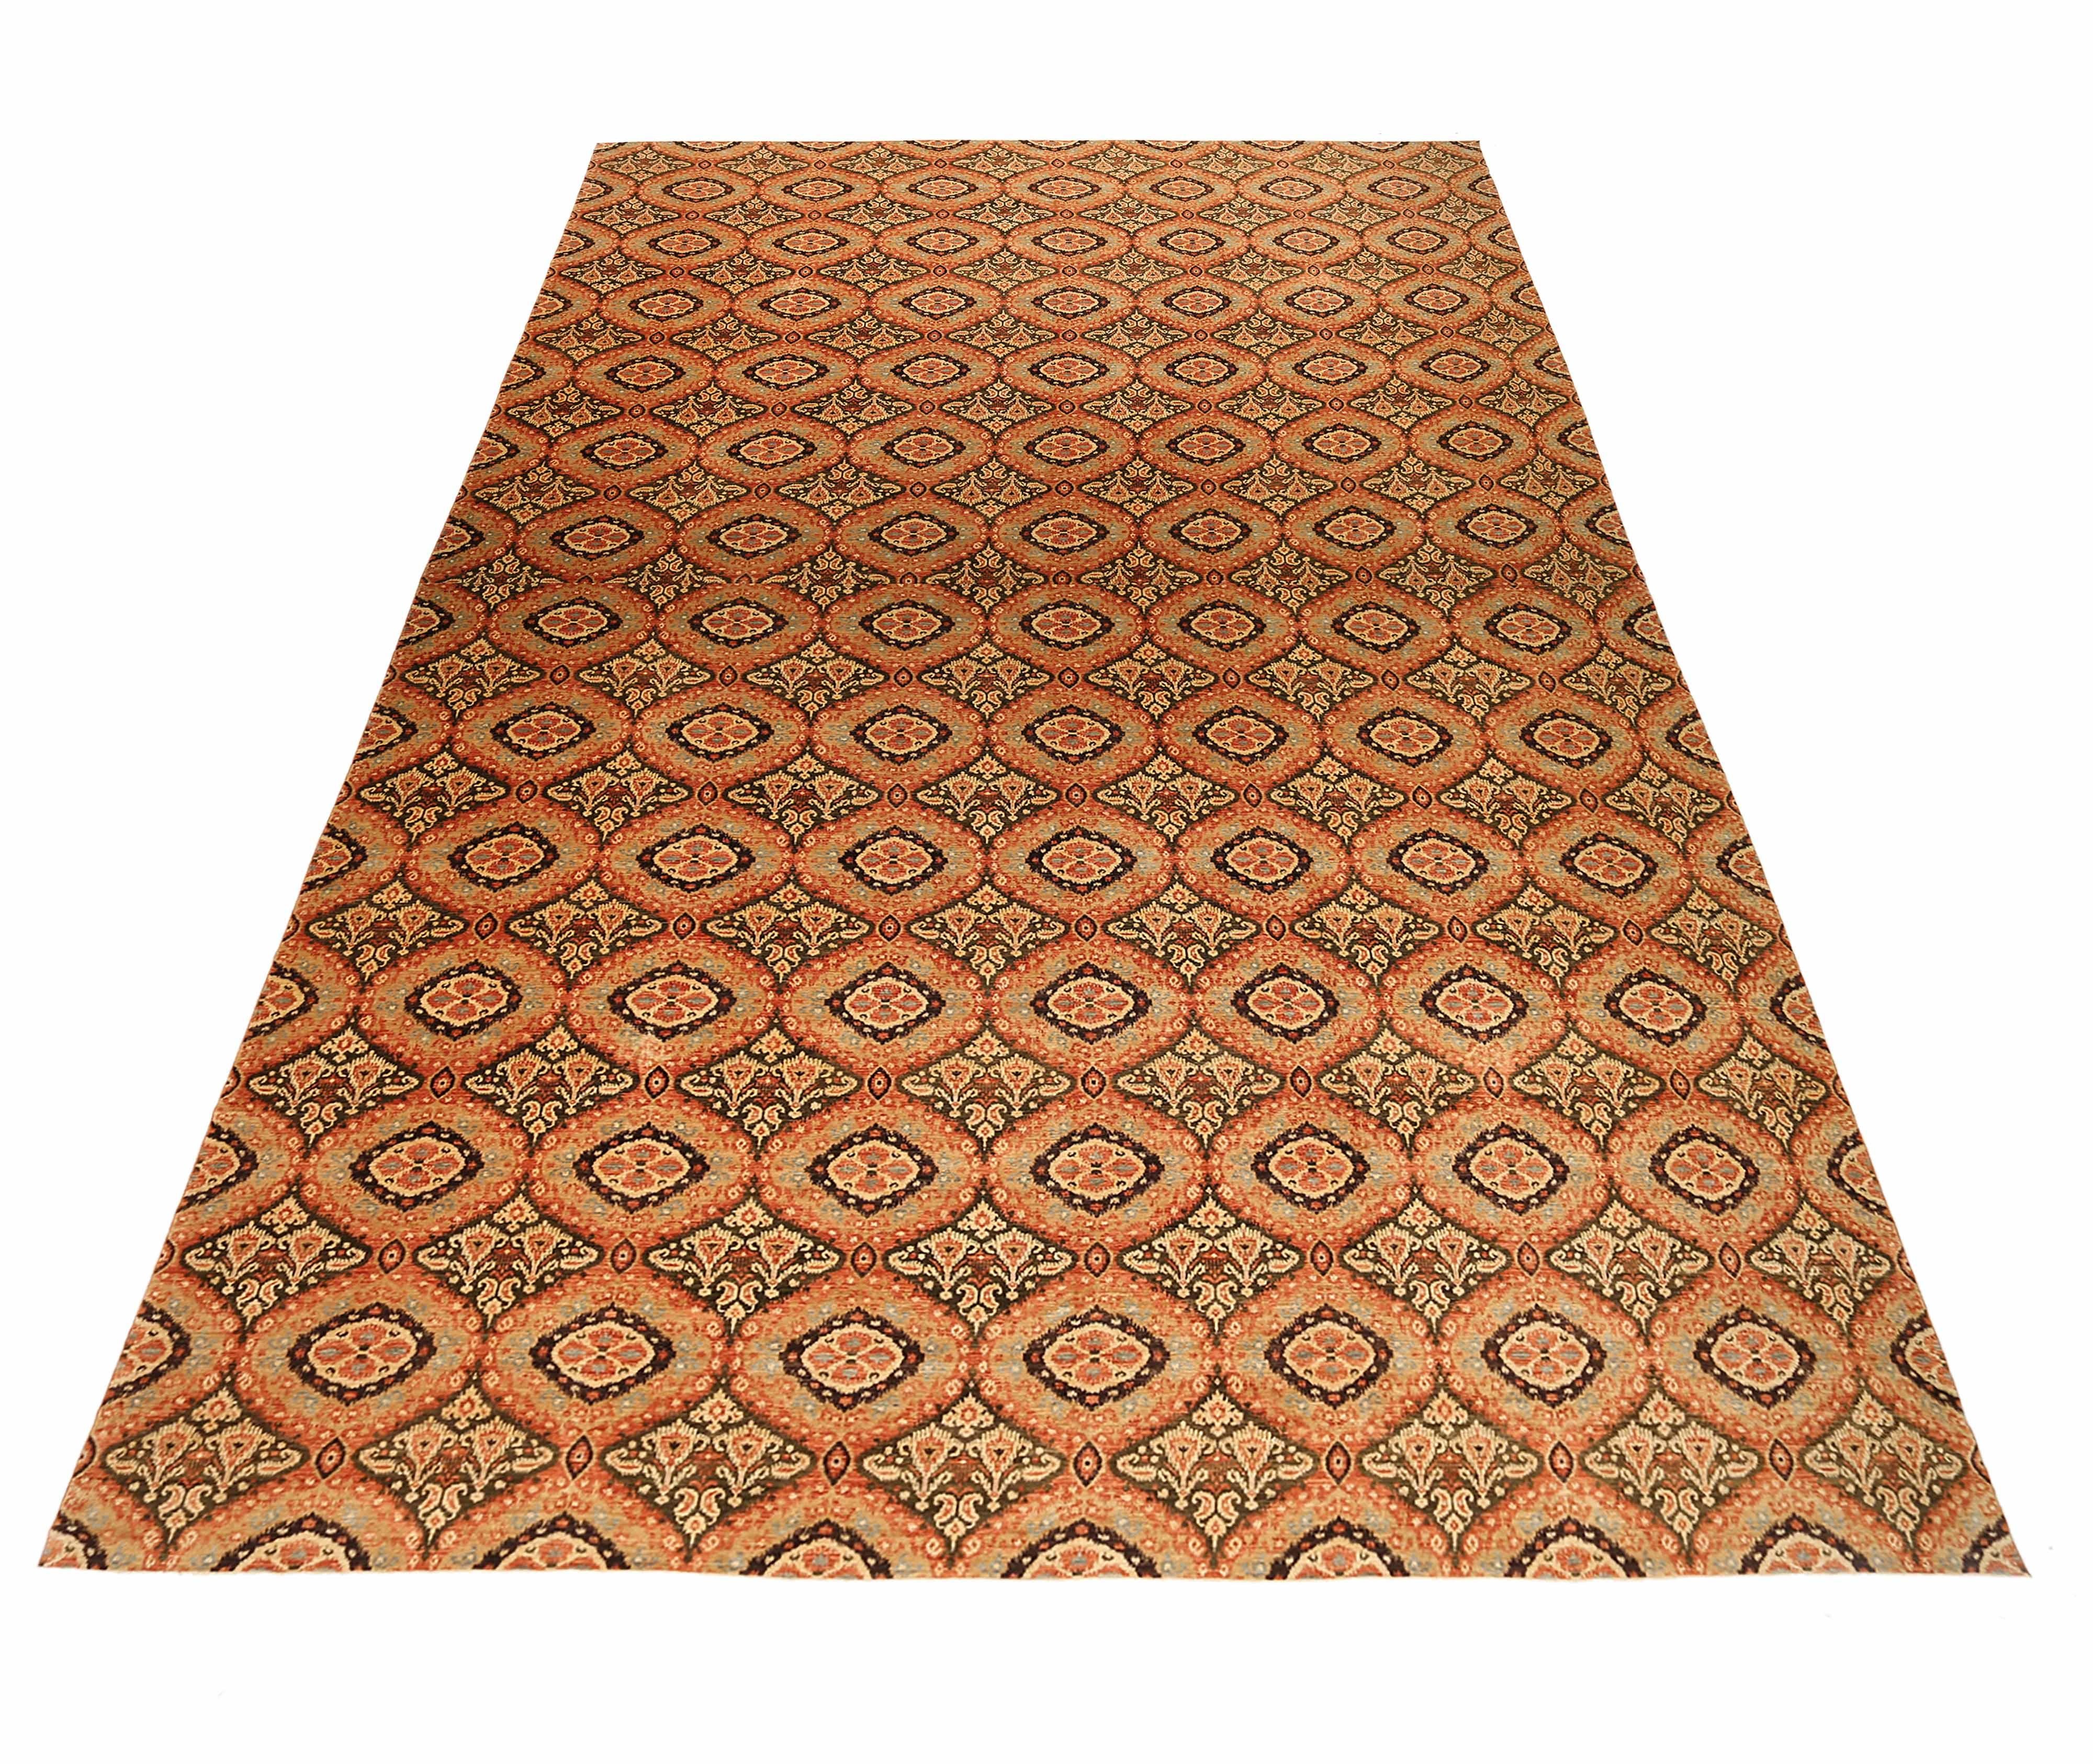 New area rug handwoven from the finest sheep’s wool. It’s colored with all-natural vegetable dyes that are safe for humans and pets. It’s a traditional Transitional design handwoven by expert artisans. It’s a lovely area rug that can be incorporated